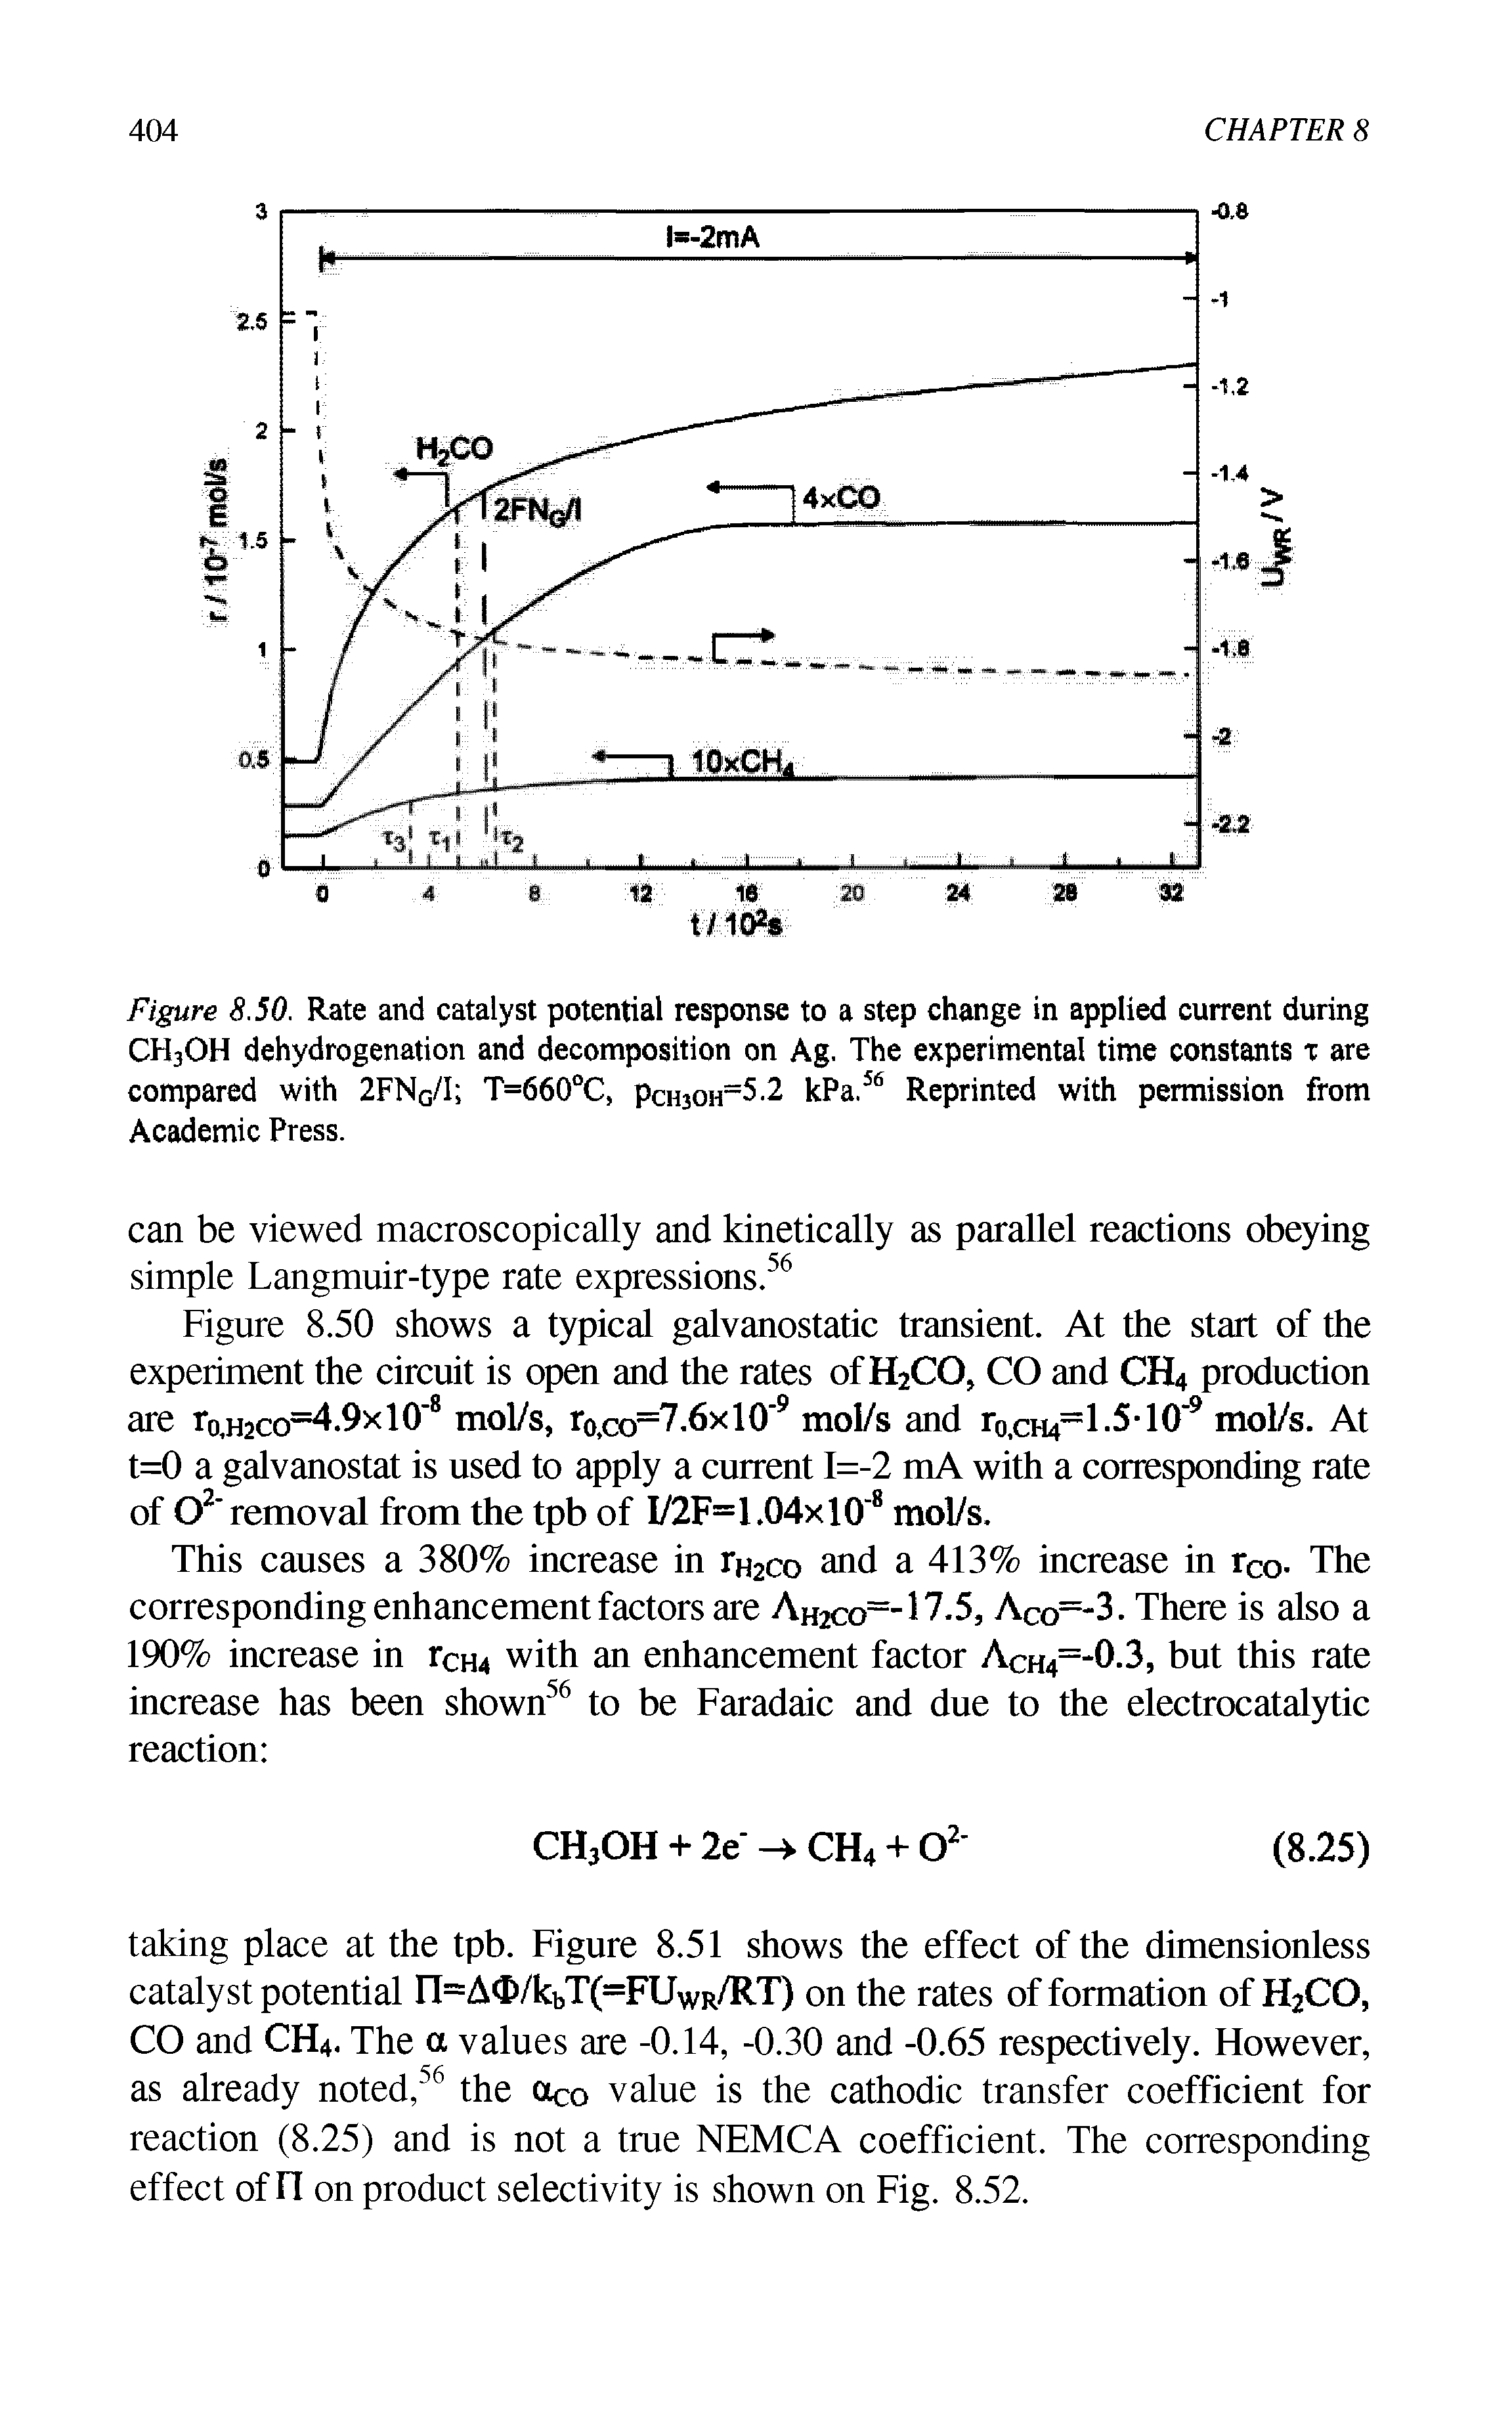 Figure 8.50. Rate and catalyst potential response to a step change in applied current during CH3OH dehydrogenation and decomposition on Ag. The experimental time constants x are compared with 2FNG/I T=660°C, Pch30h=5.2 kPa.56 Reprinted with permission from Academic Press.